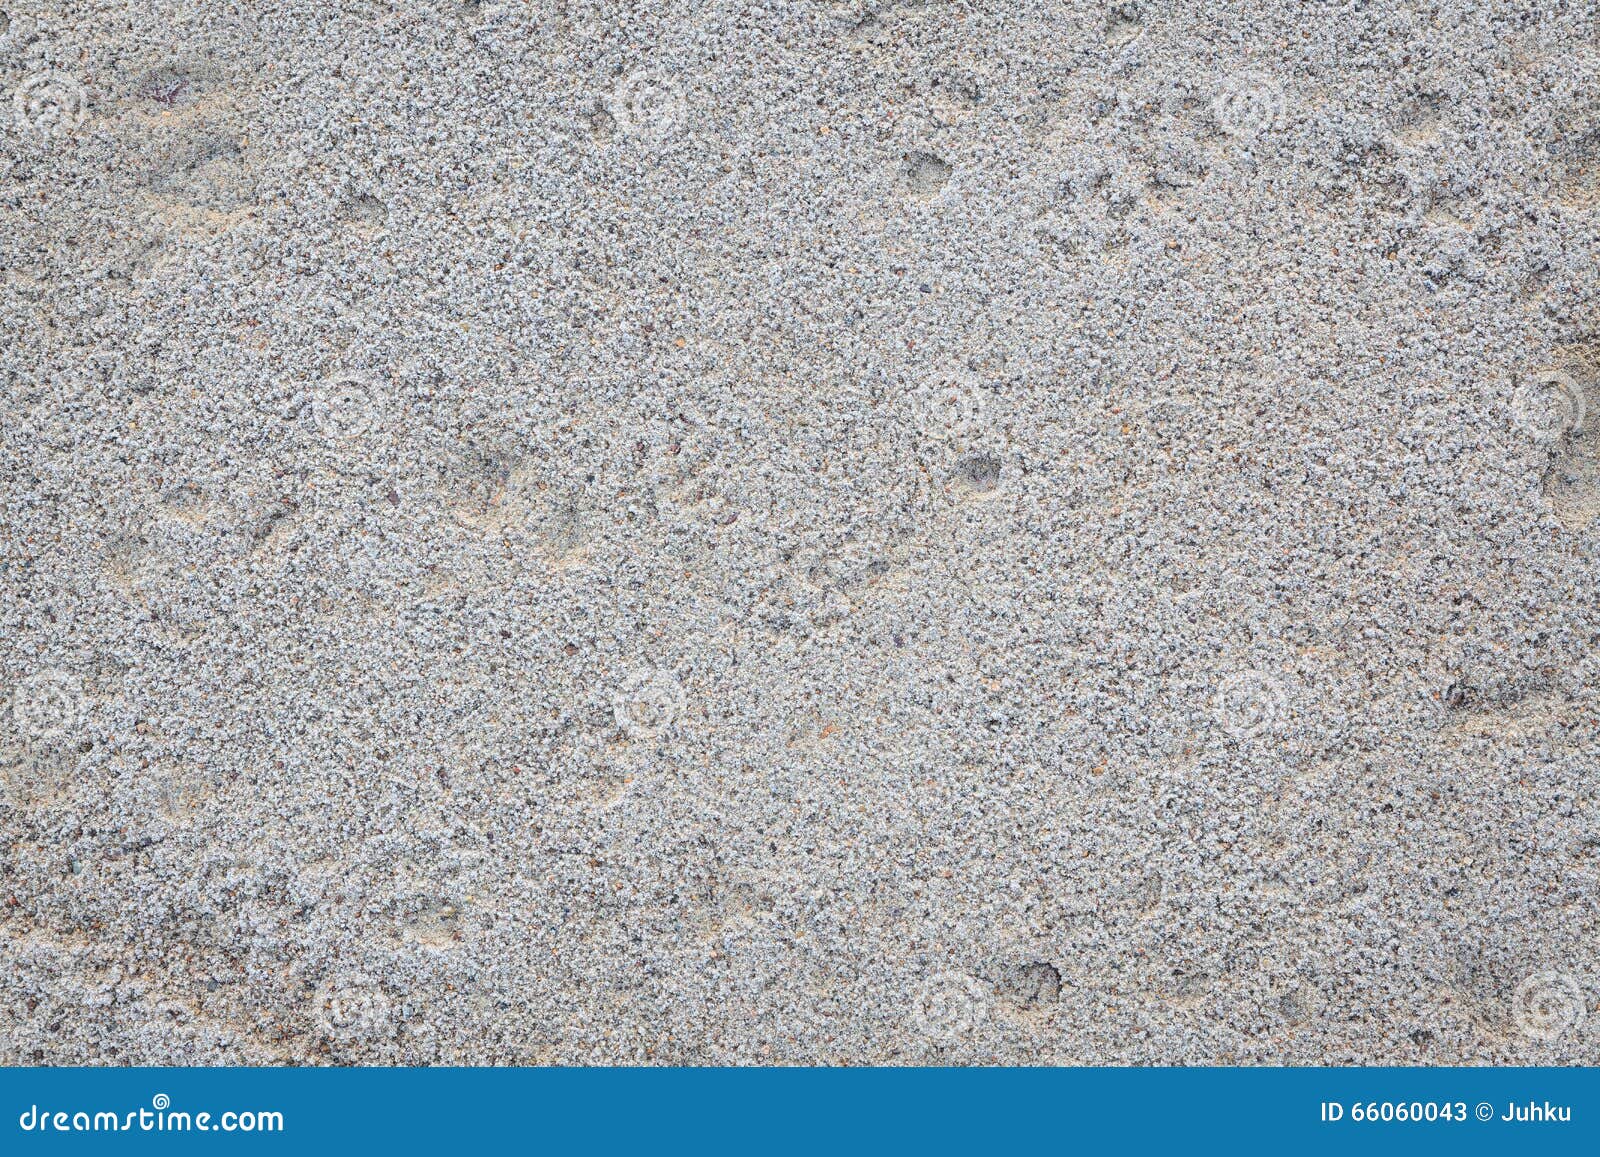 Frozen dirt road close-up stock image. Image of abstract - 66060043